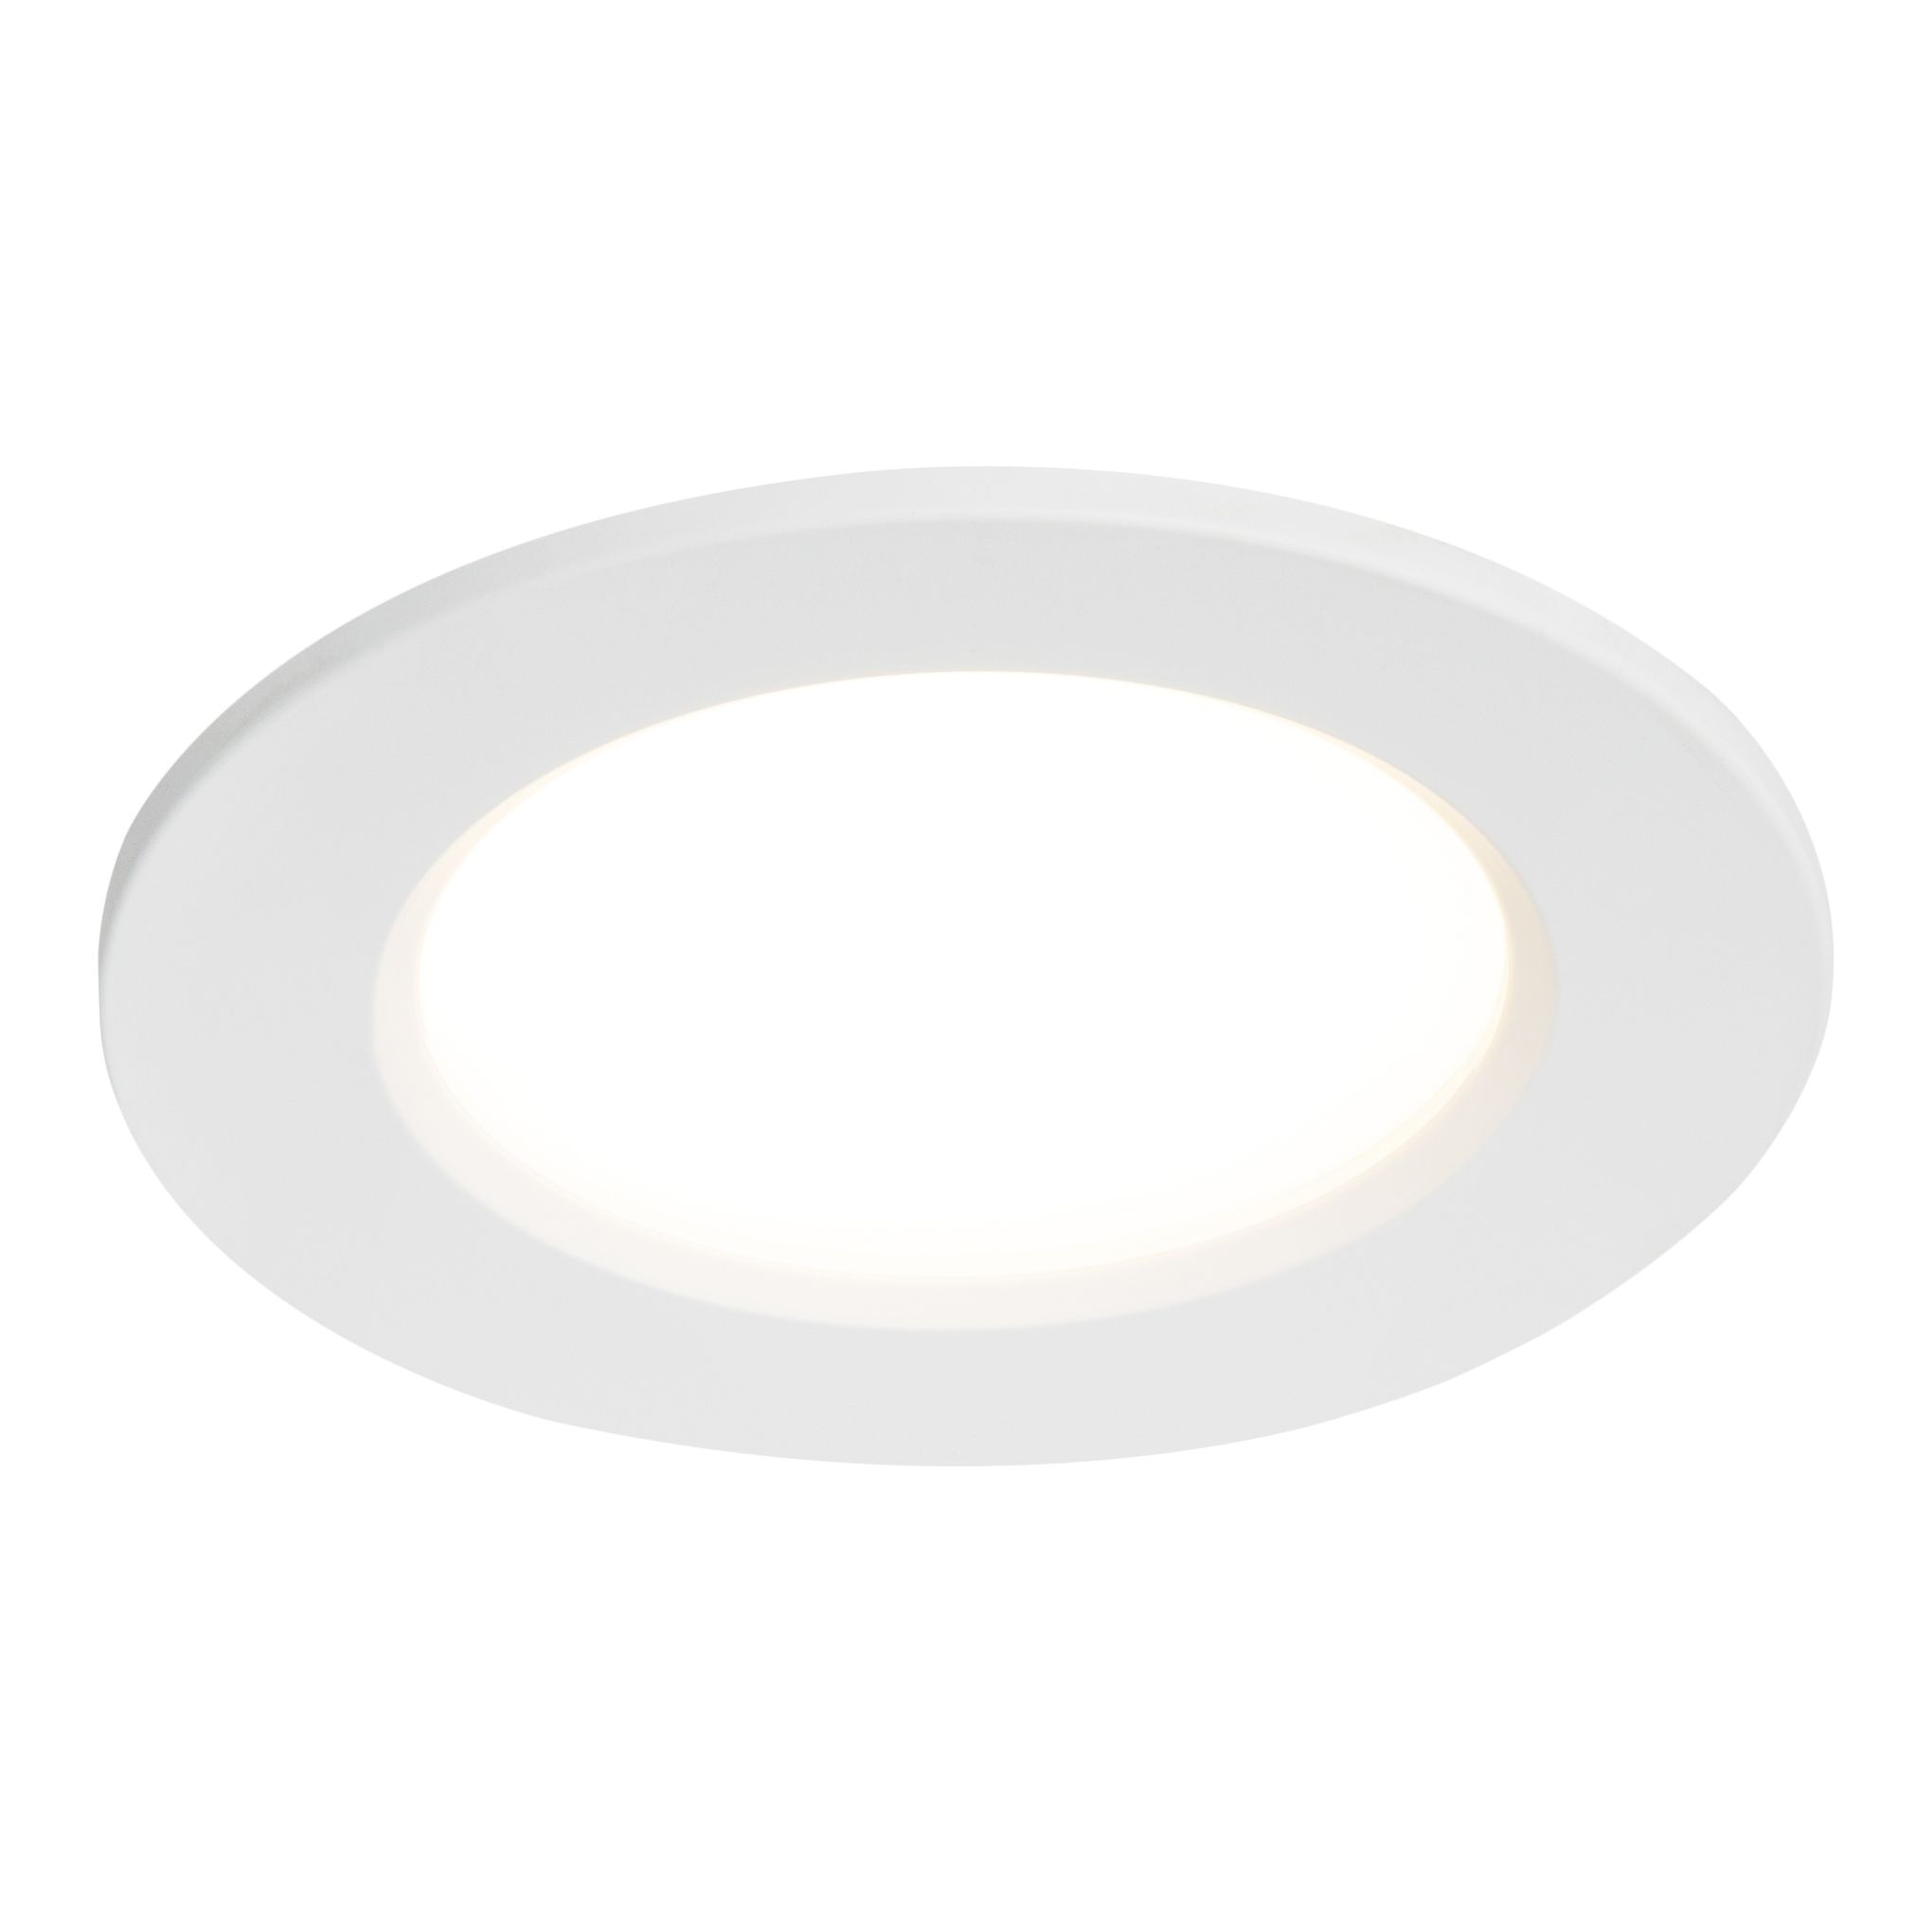 GoodHome Ledyard White Mains-powered LED Neutral white Cabinet downlight IP20 (L)64mm (W)64mm, Pack of 3